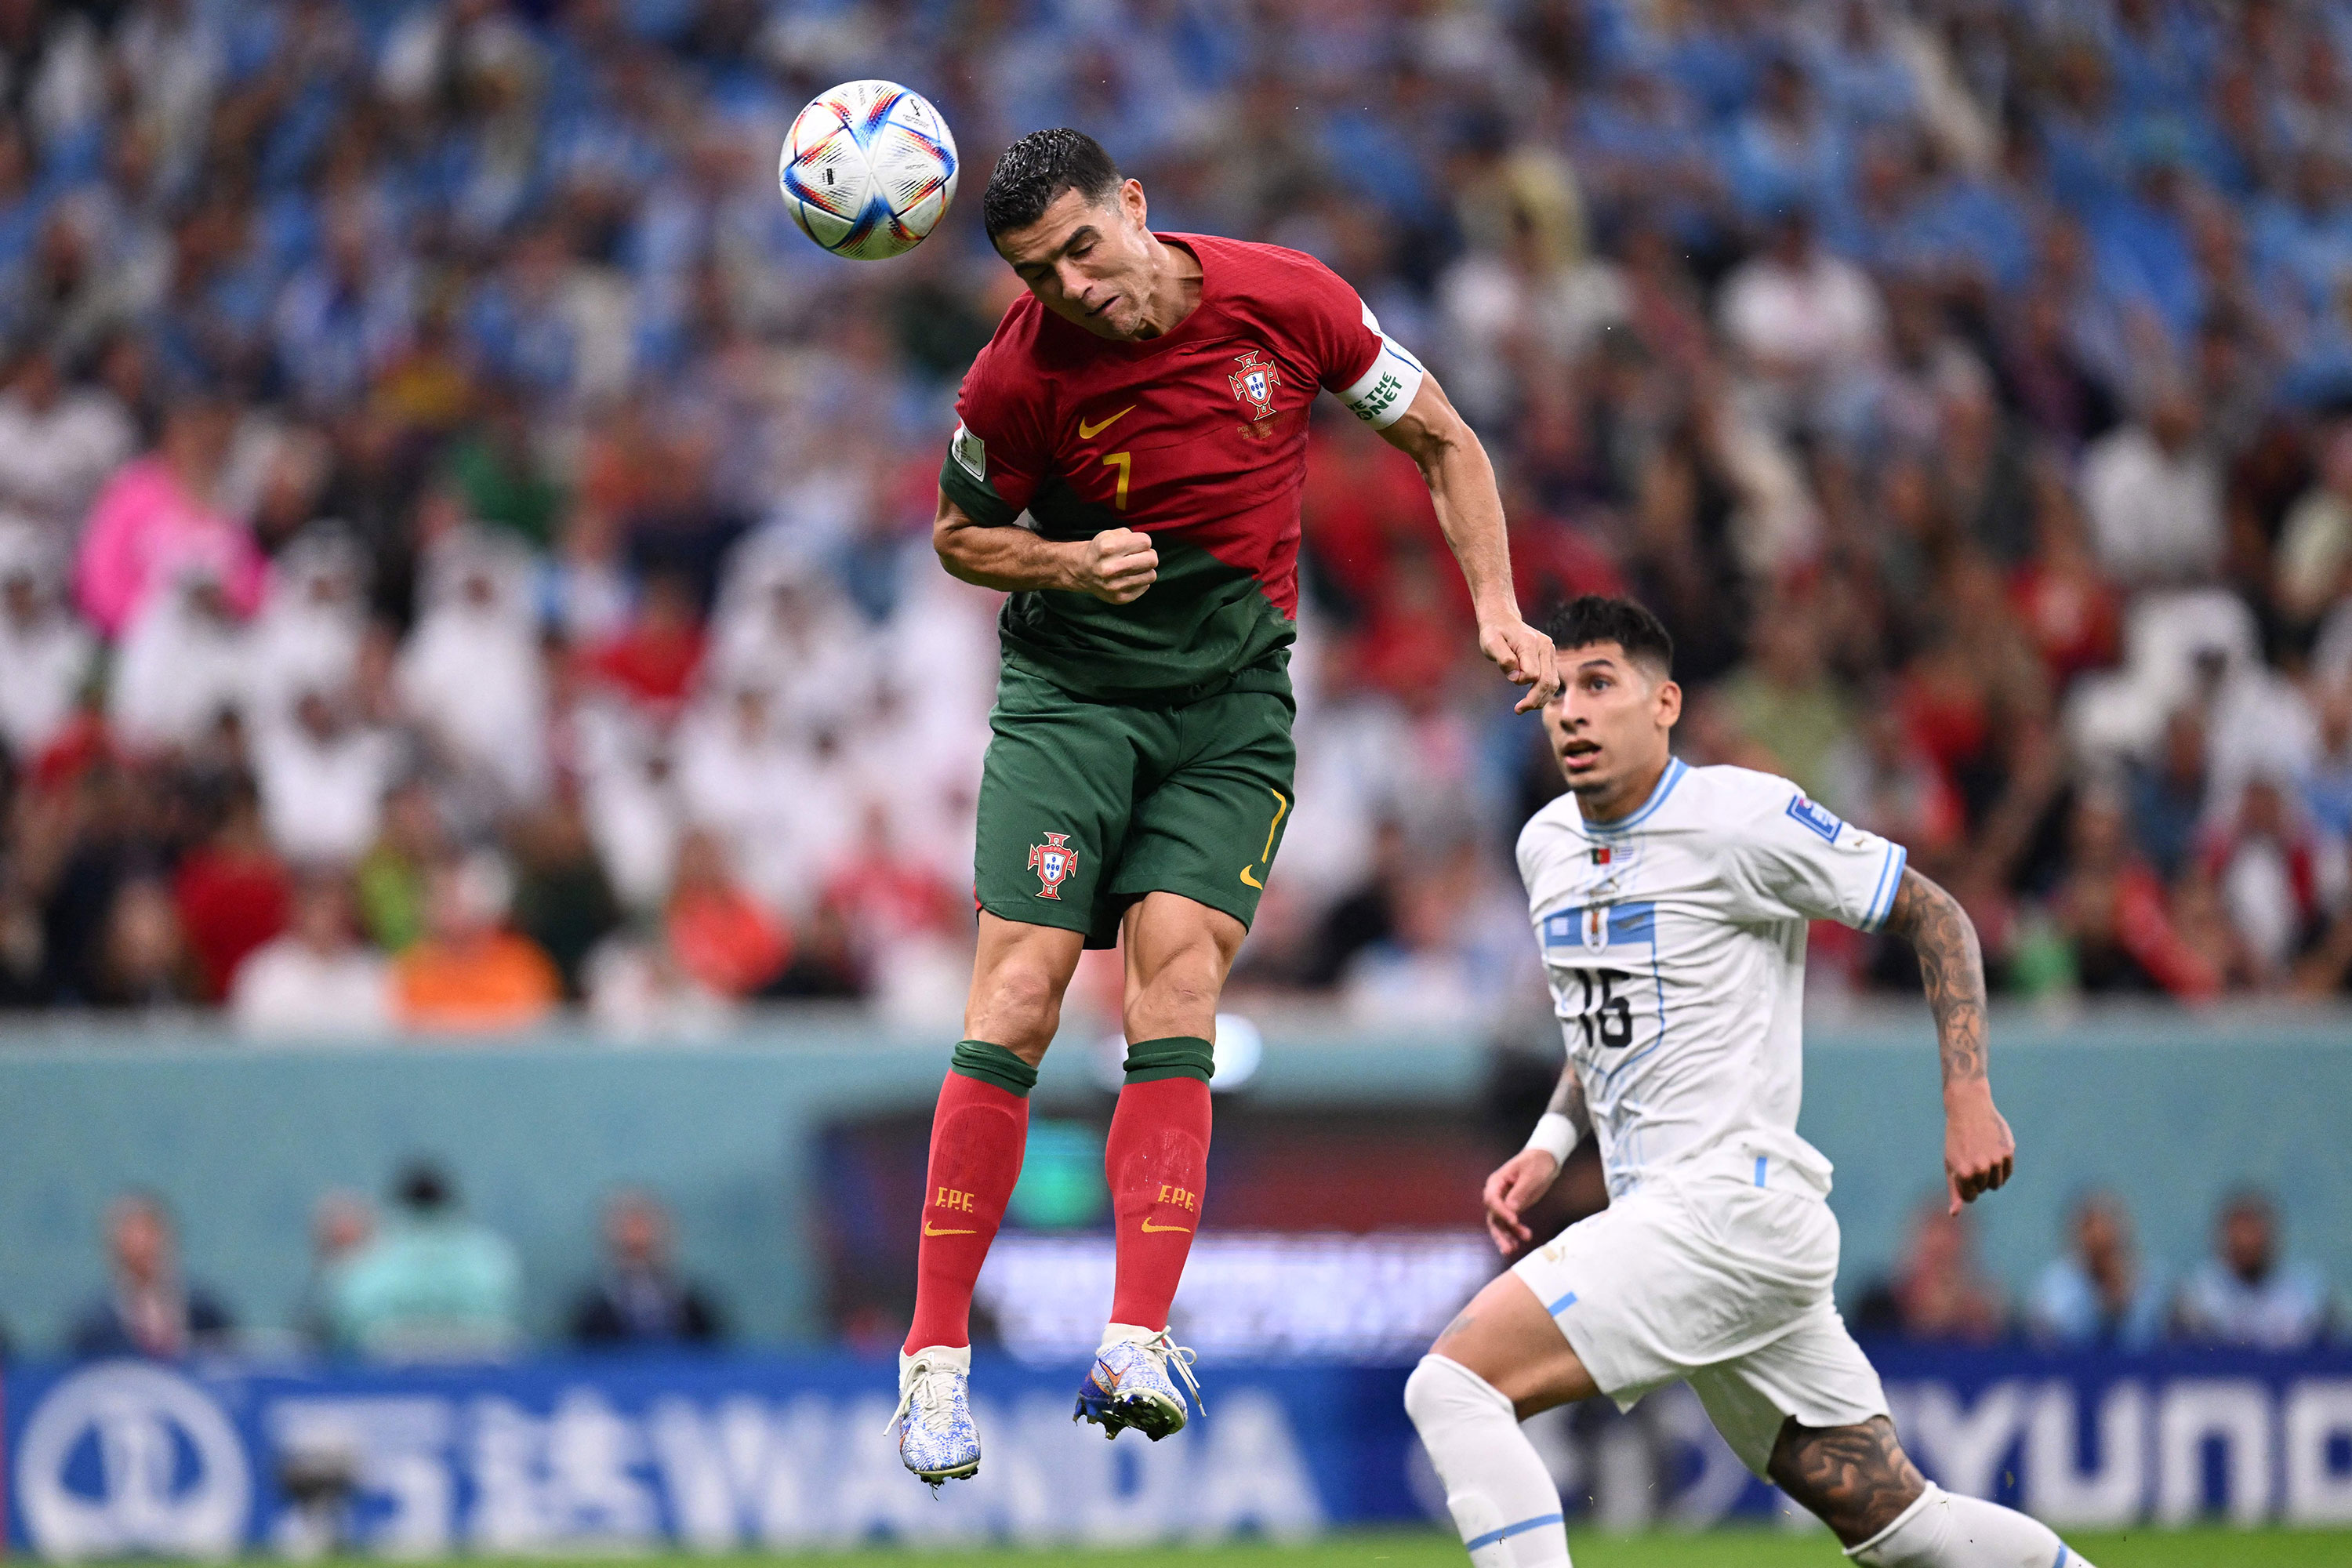 Portugal's Cristiano Ronaldo jumps up to head the ball on Monday.